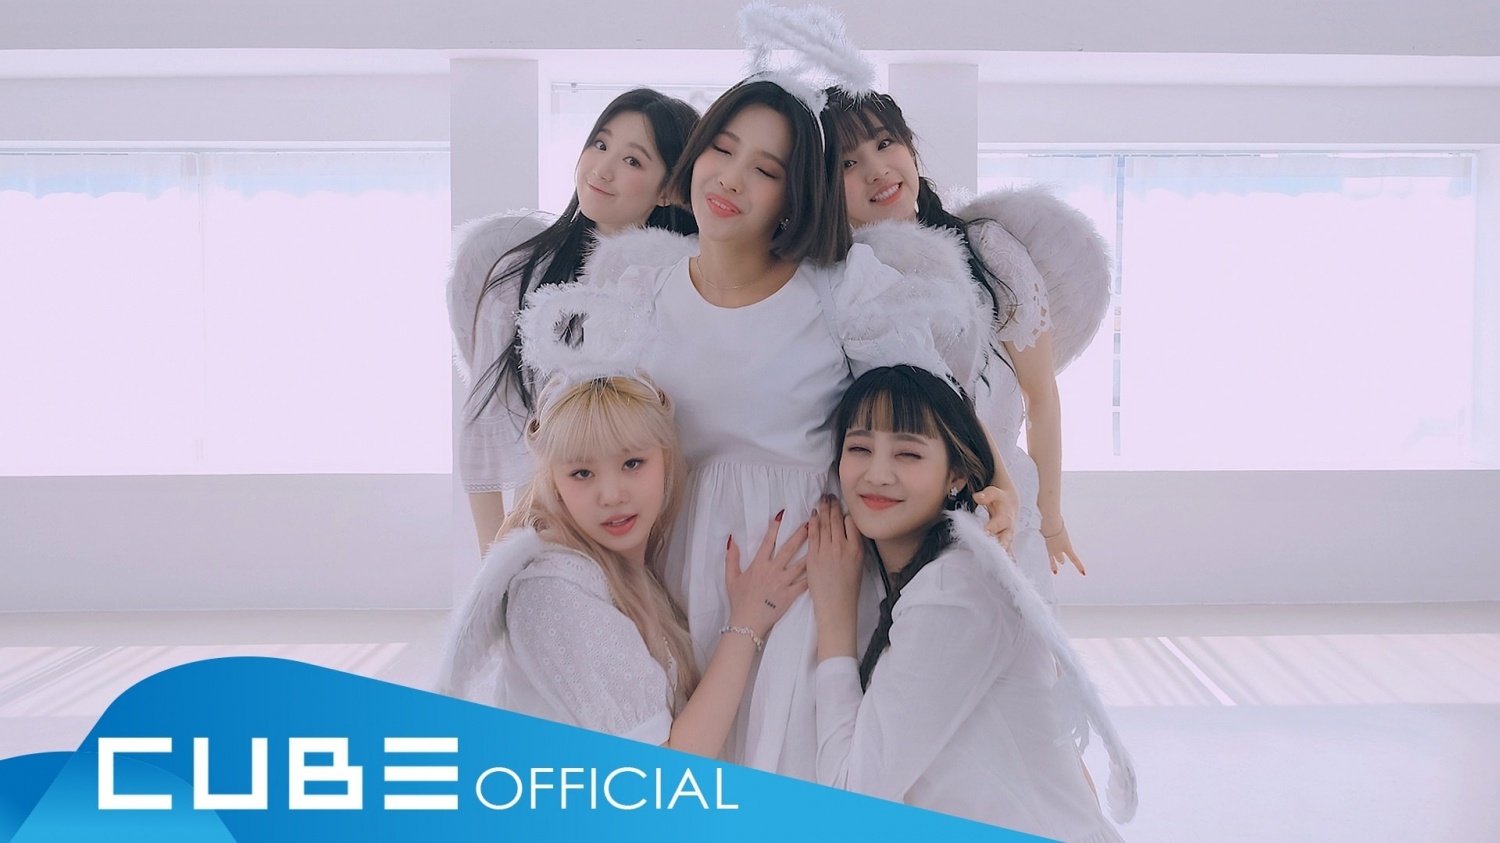 (G)I-DLE Releases Special Choreography Video for "Oh My God"